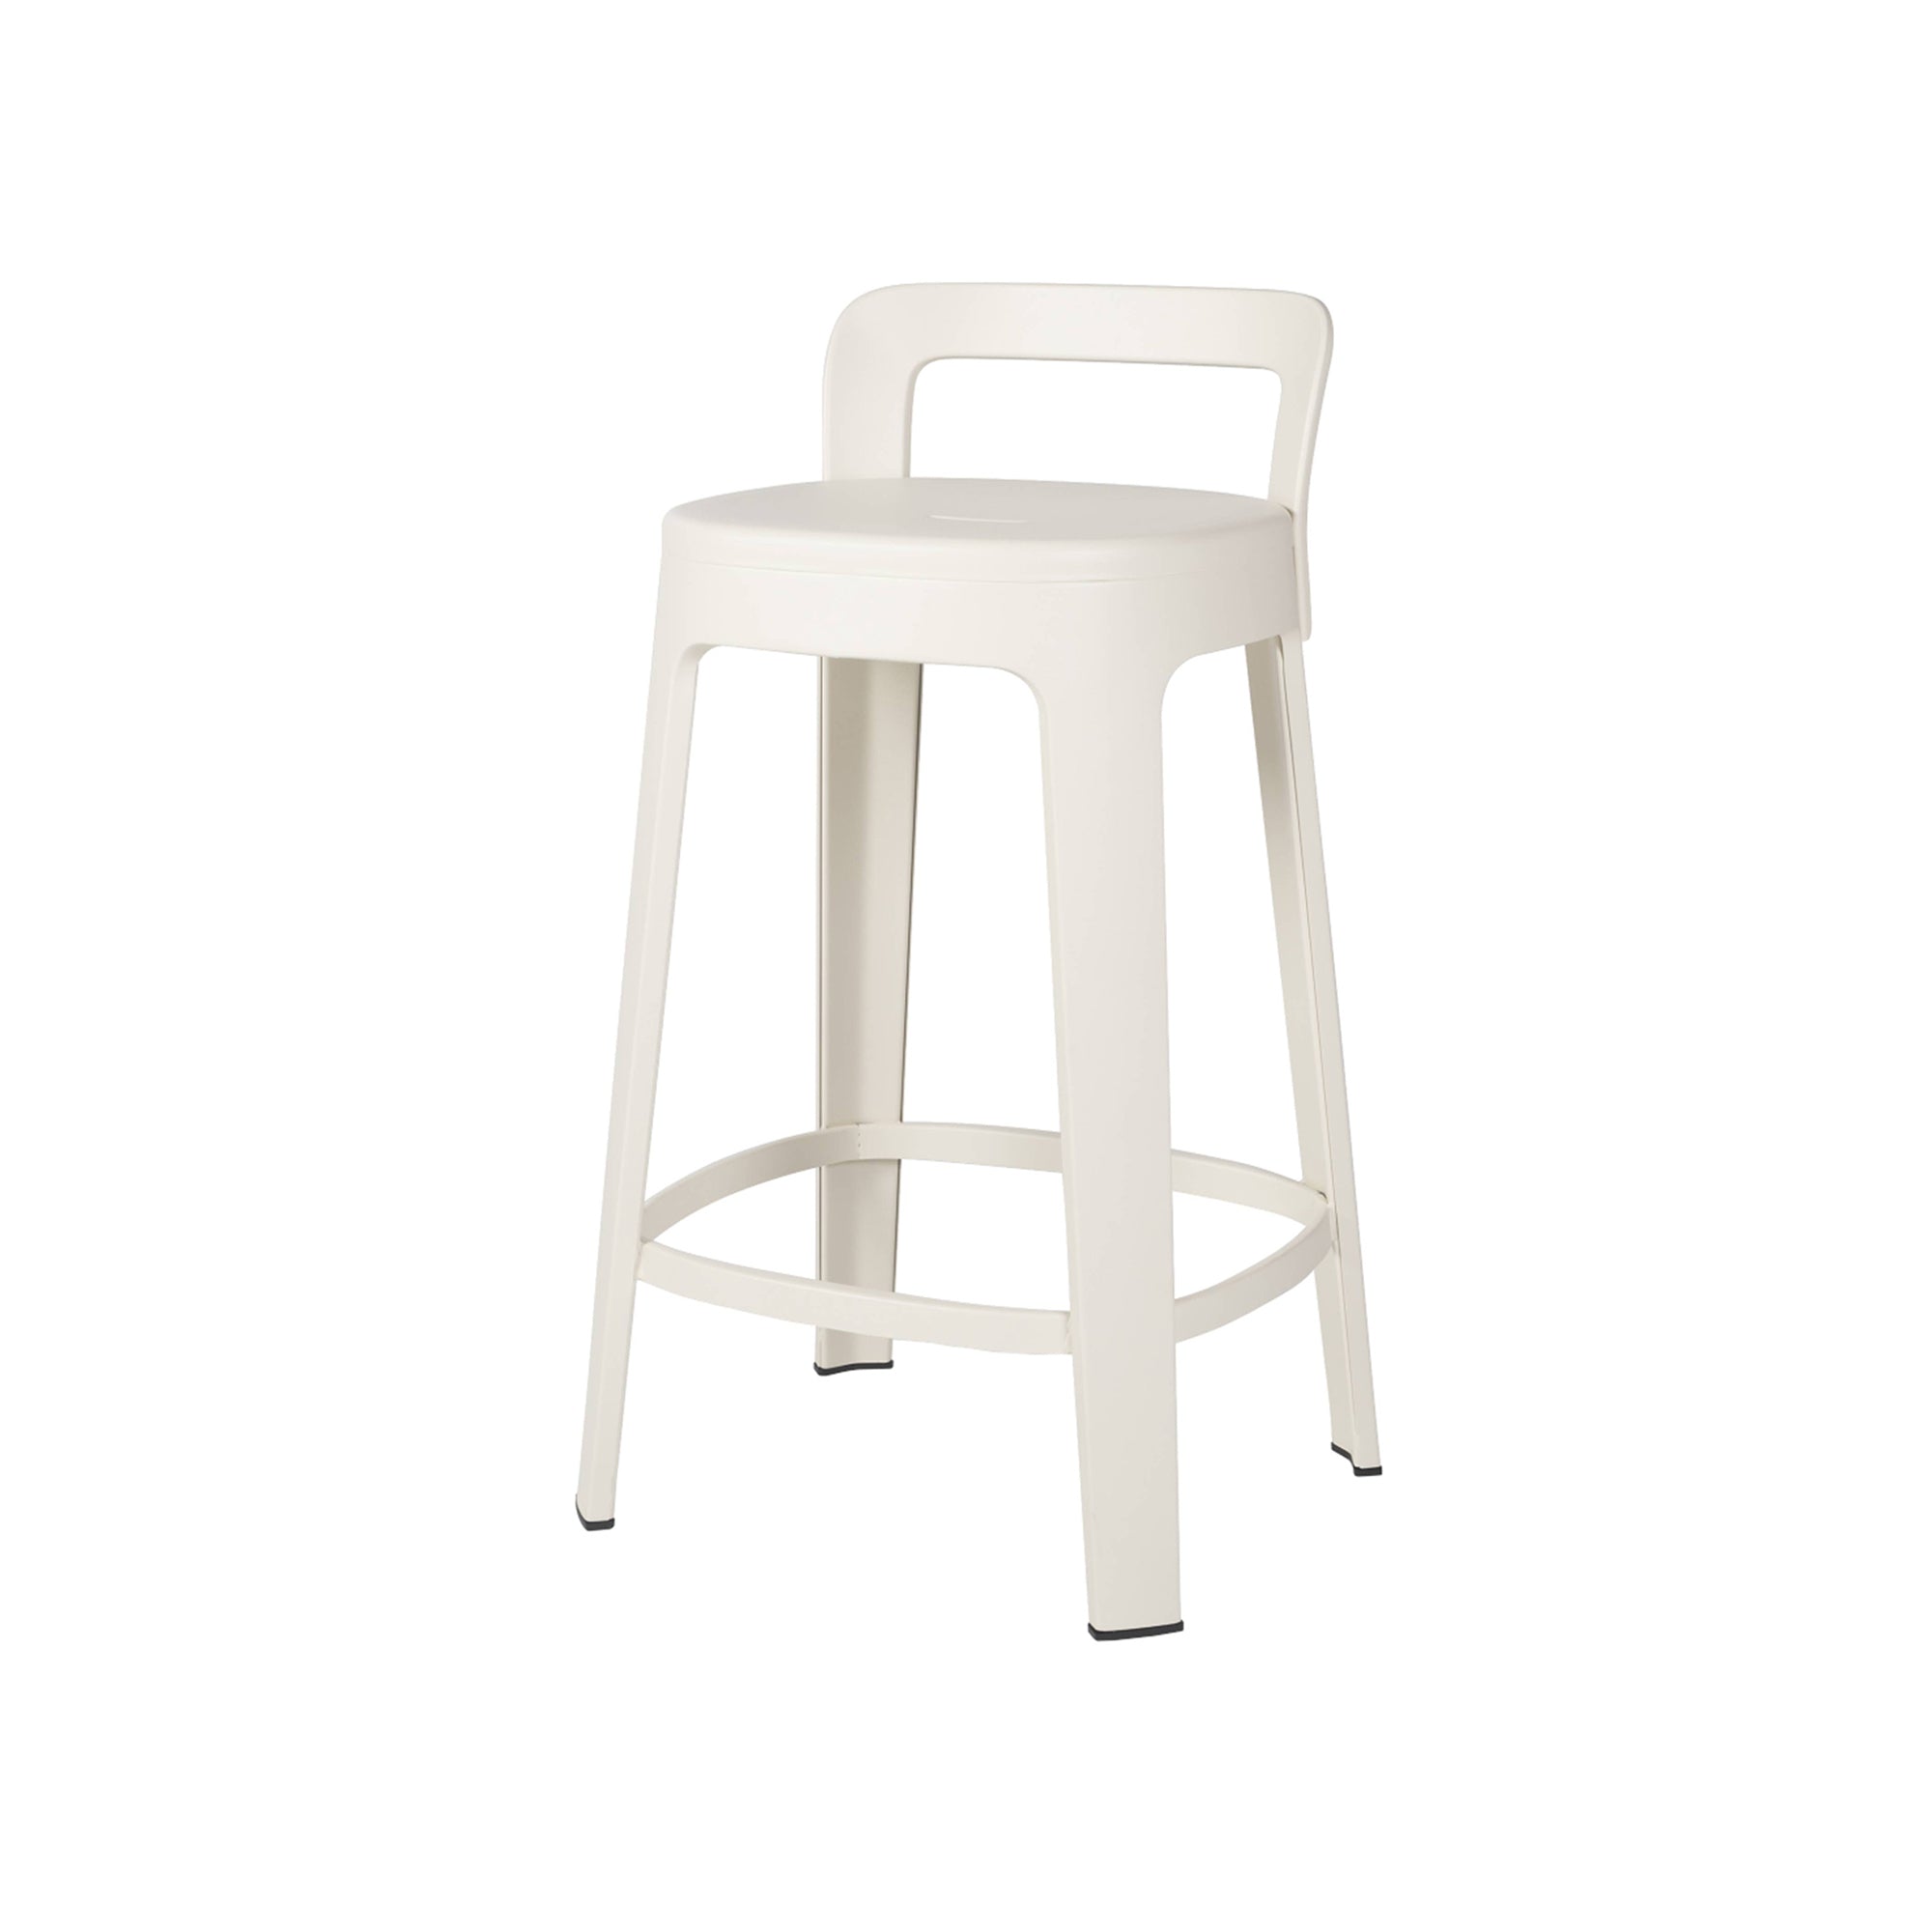 Ombra Bar + Counter Stool with Backrest: Counter + White